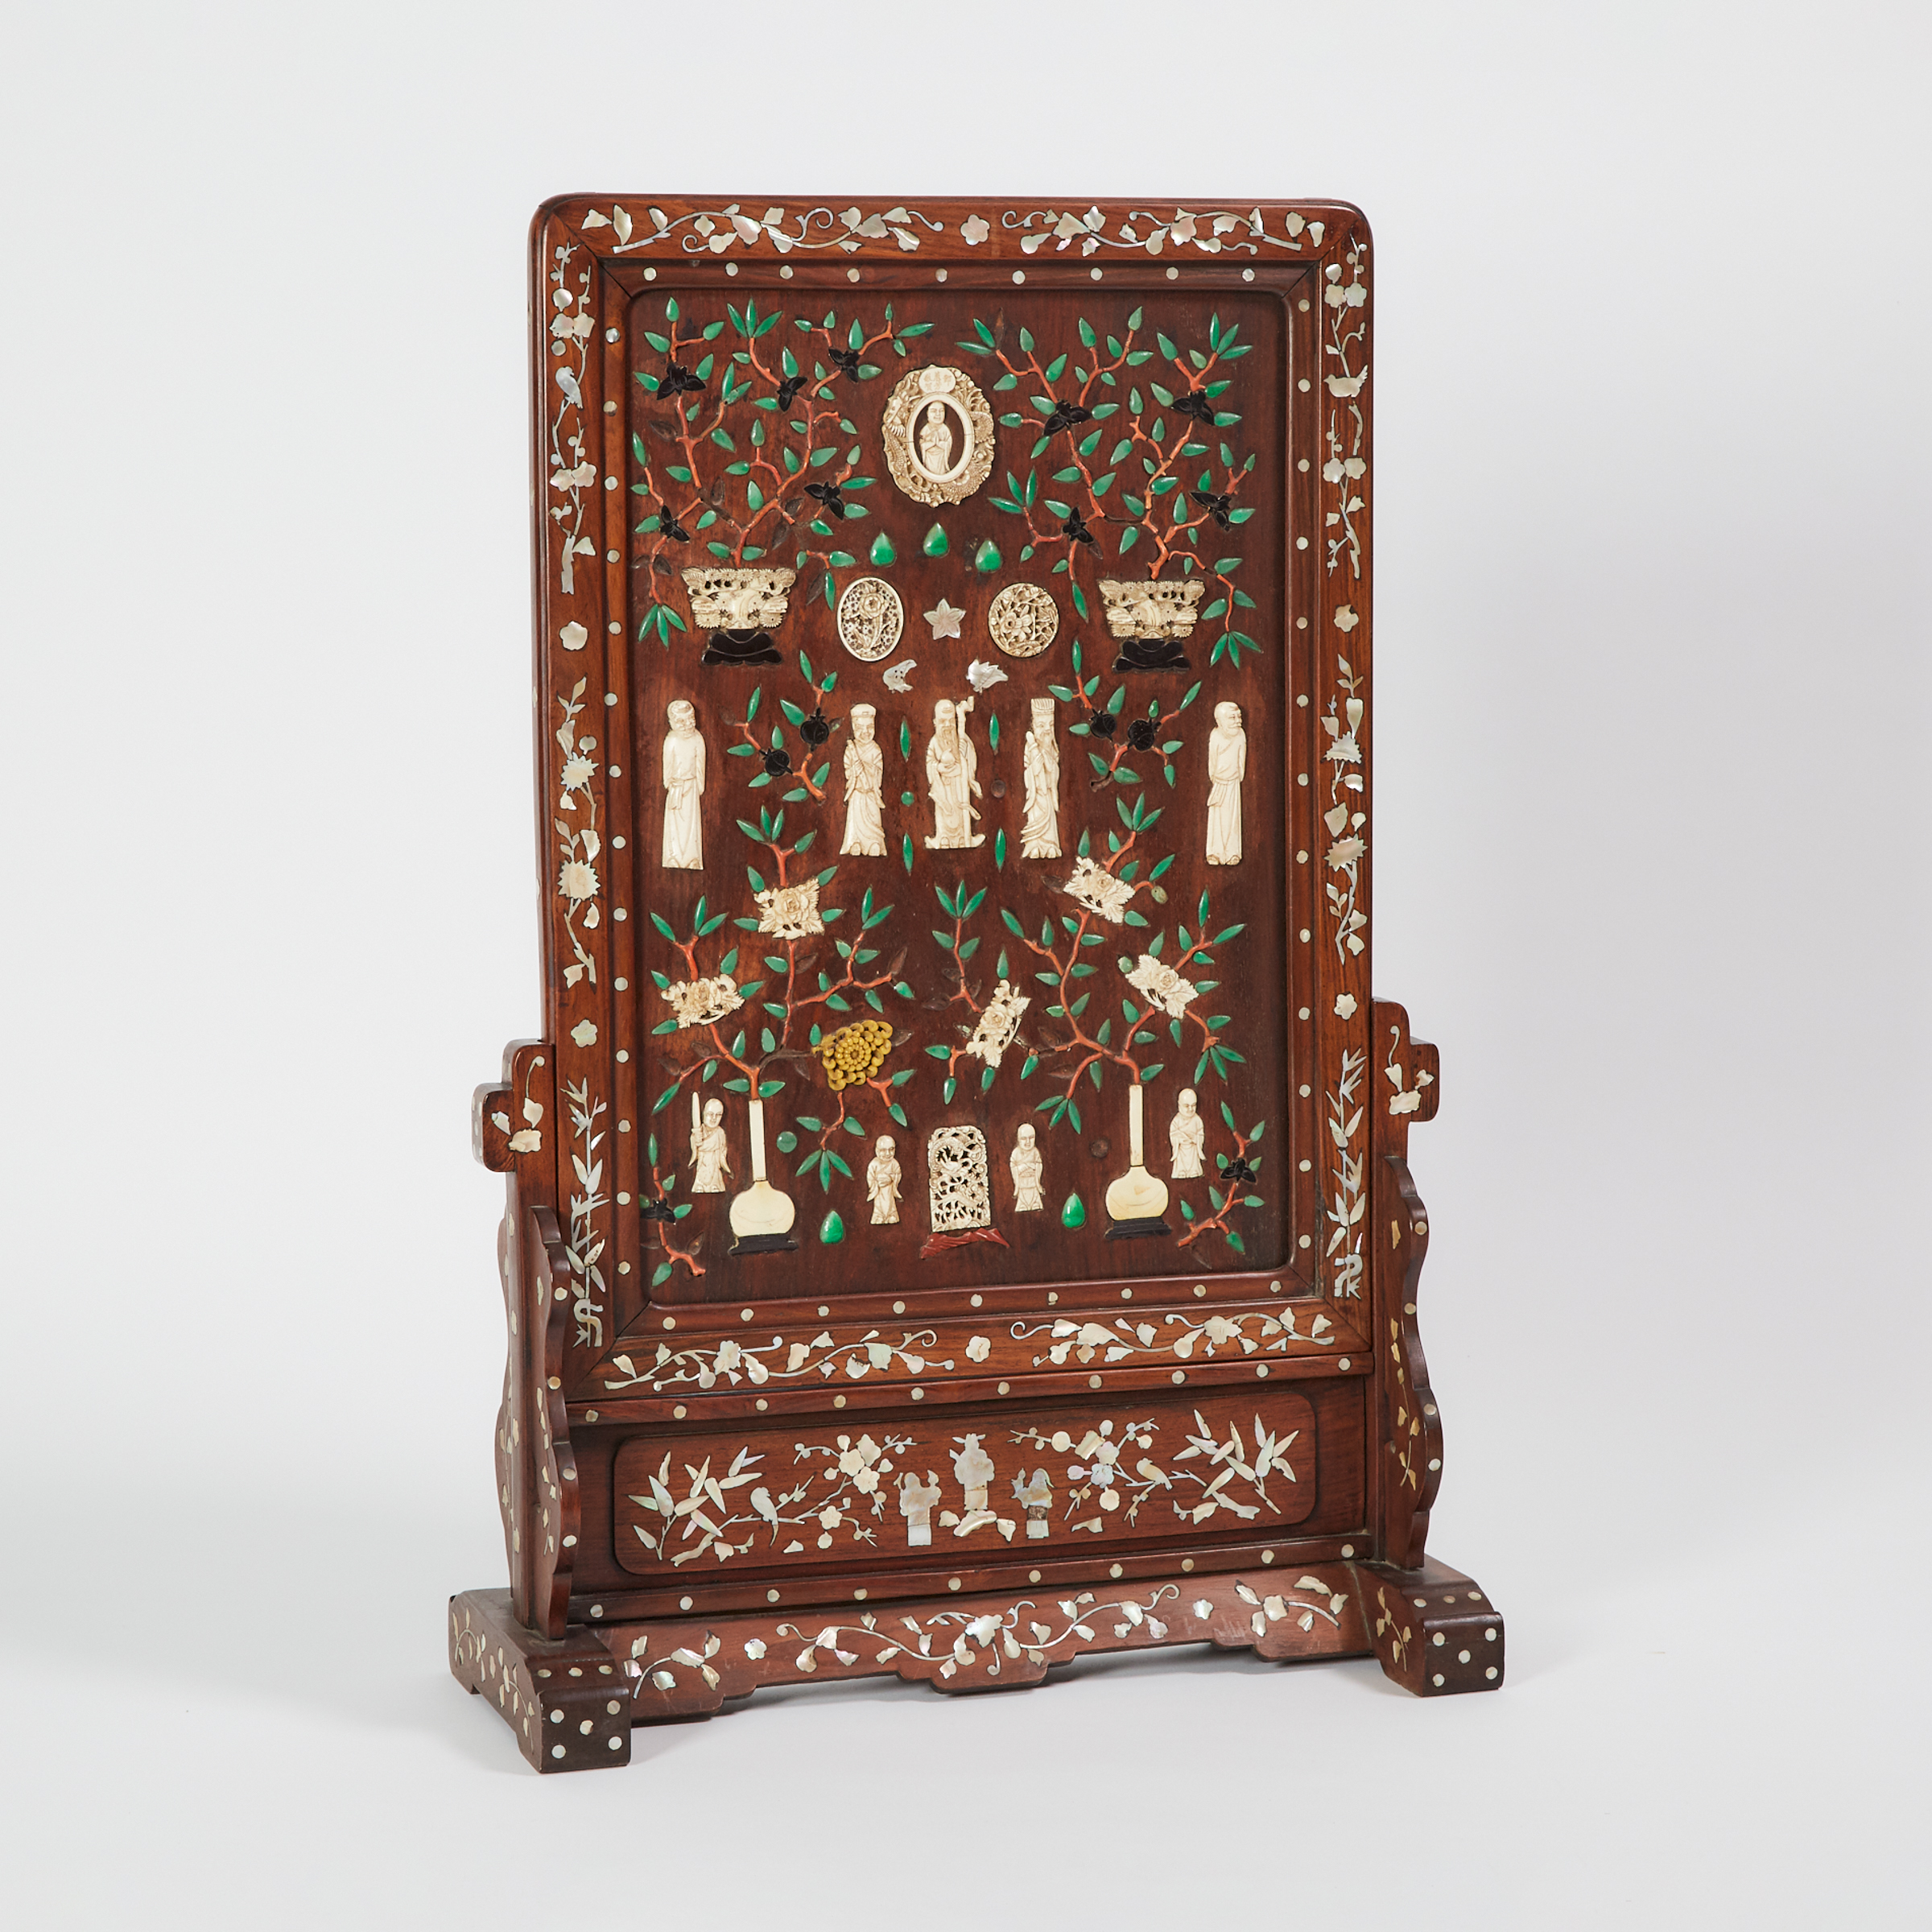 An Ivory and Bone Inlaid Table Screen